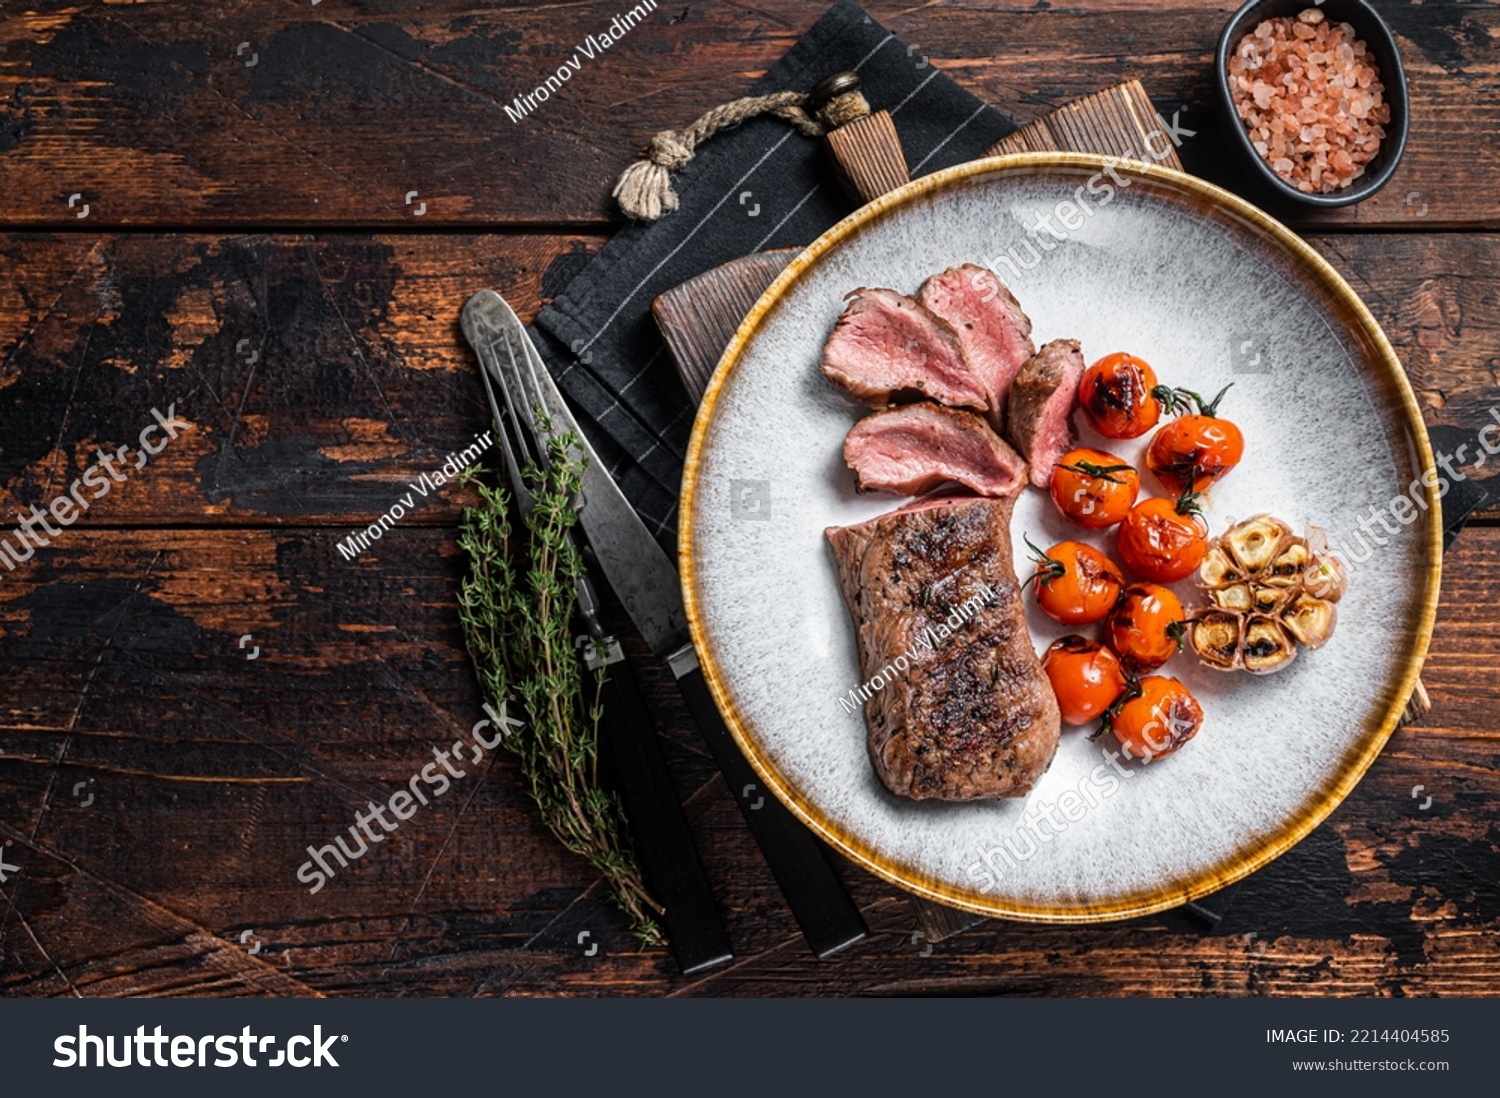 Roasted Lamb tenderloin meat in plate with grilled tomato and garlic, mutton sirloin fillet steak. Dark background. Top view. Copy space. #2214404585